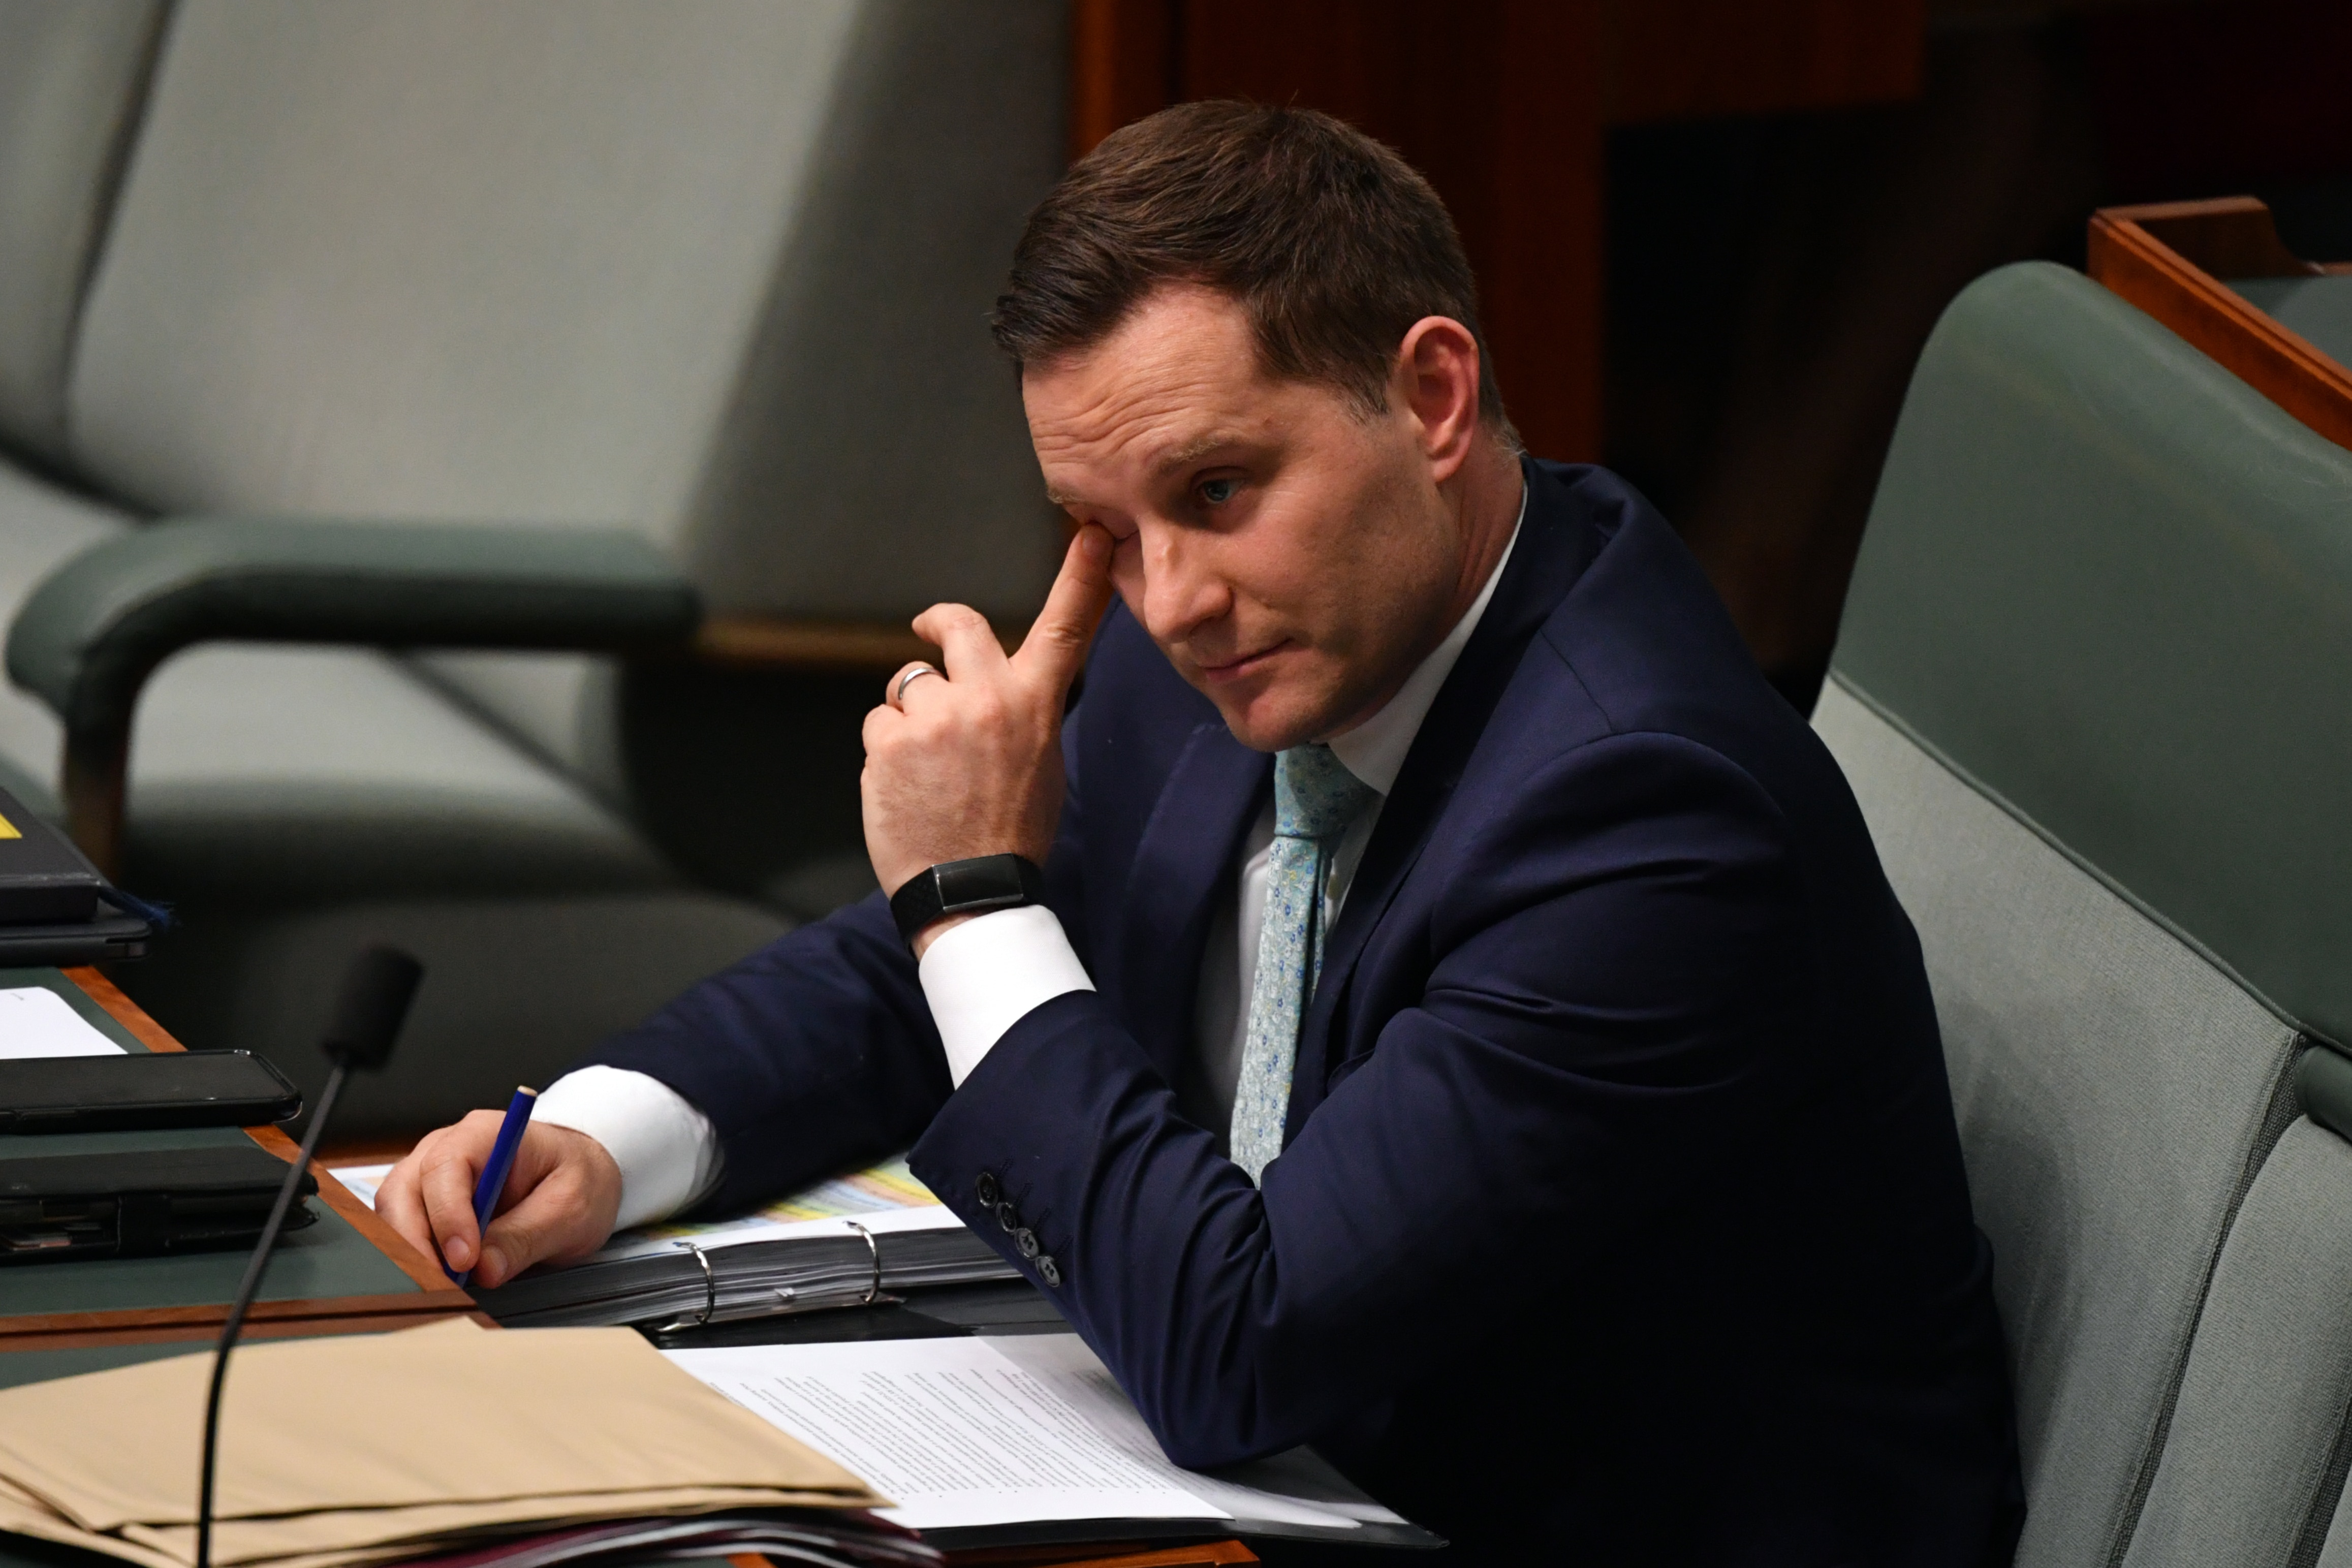 Minister for Immigration Alex Hawke during Question Time in the House of Representatives at Parliament House in Canberra, Wednesday, March 24, 2021. (AAP Image/Mick Tsikas) NO ARCHIVING